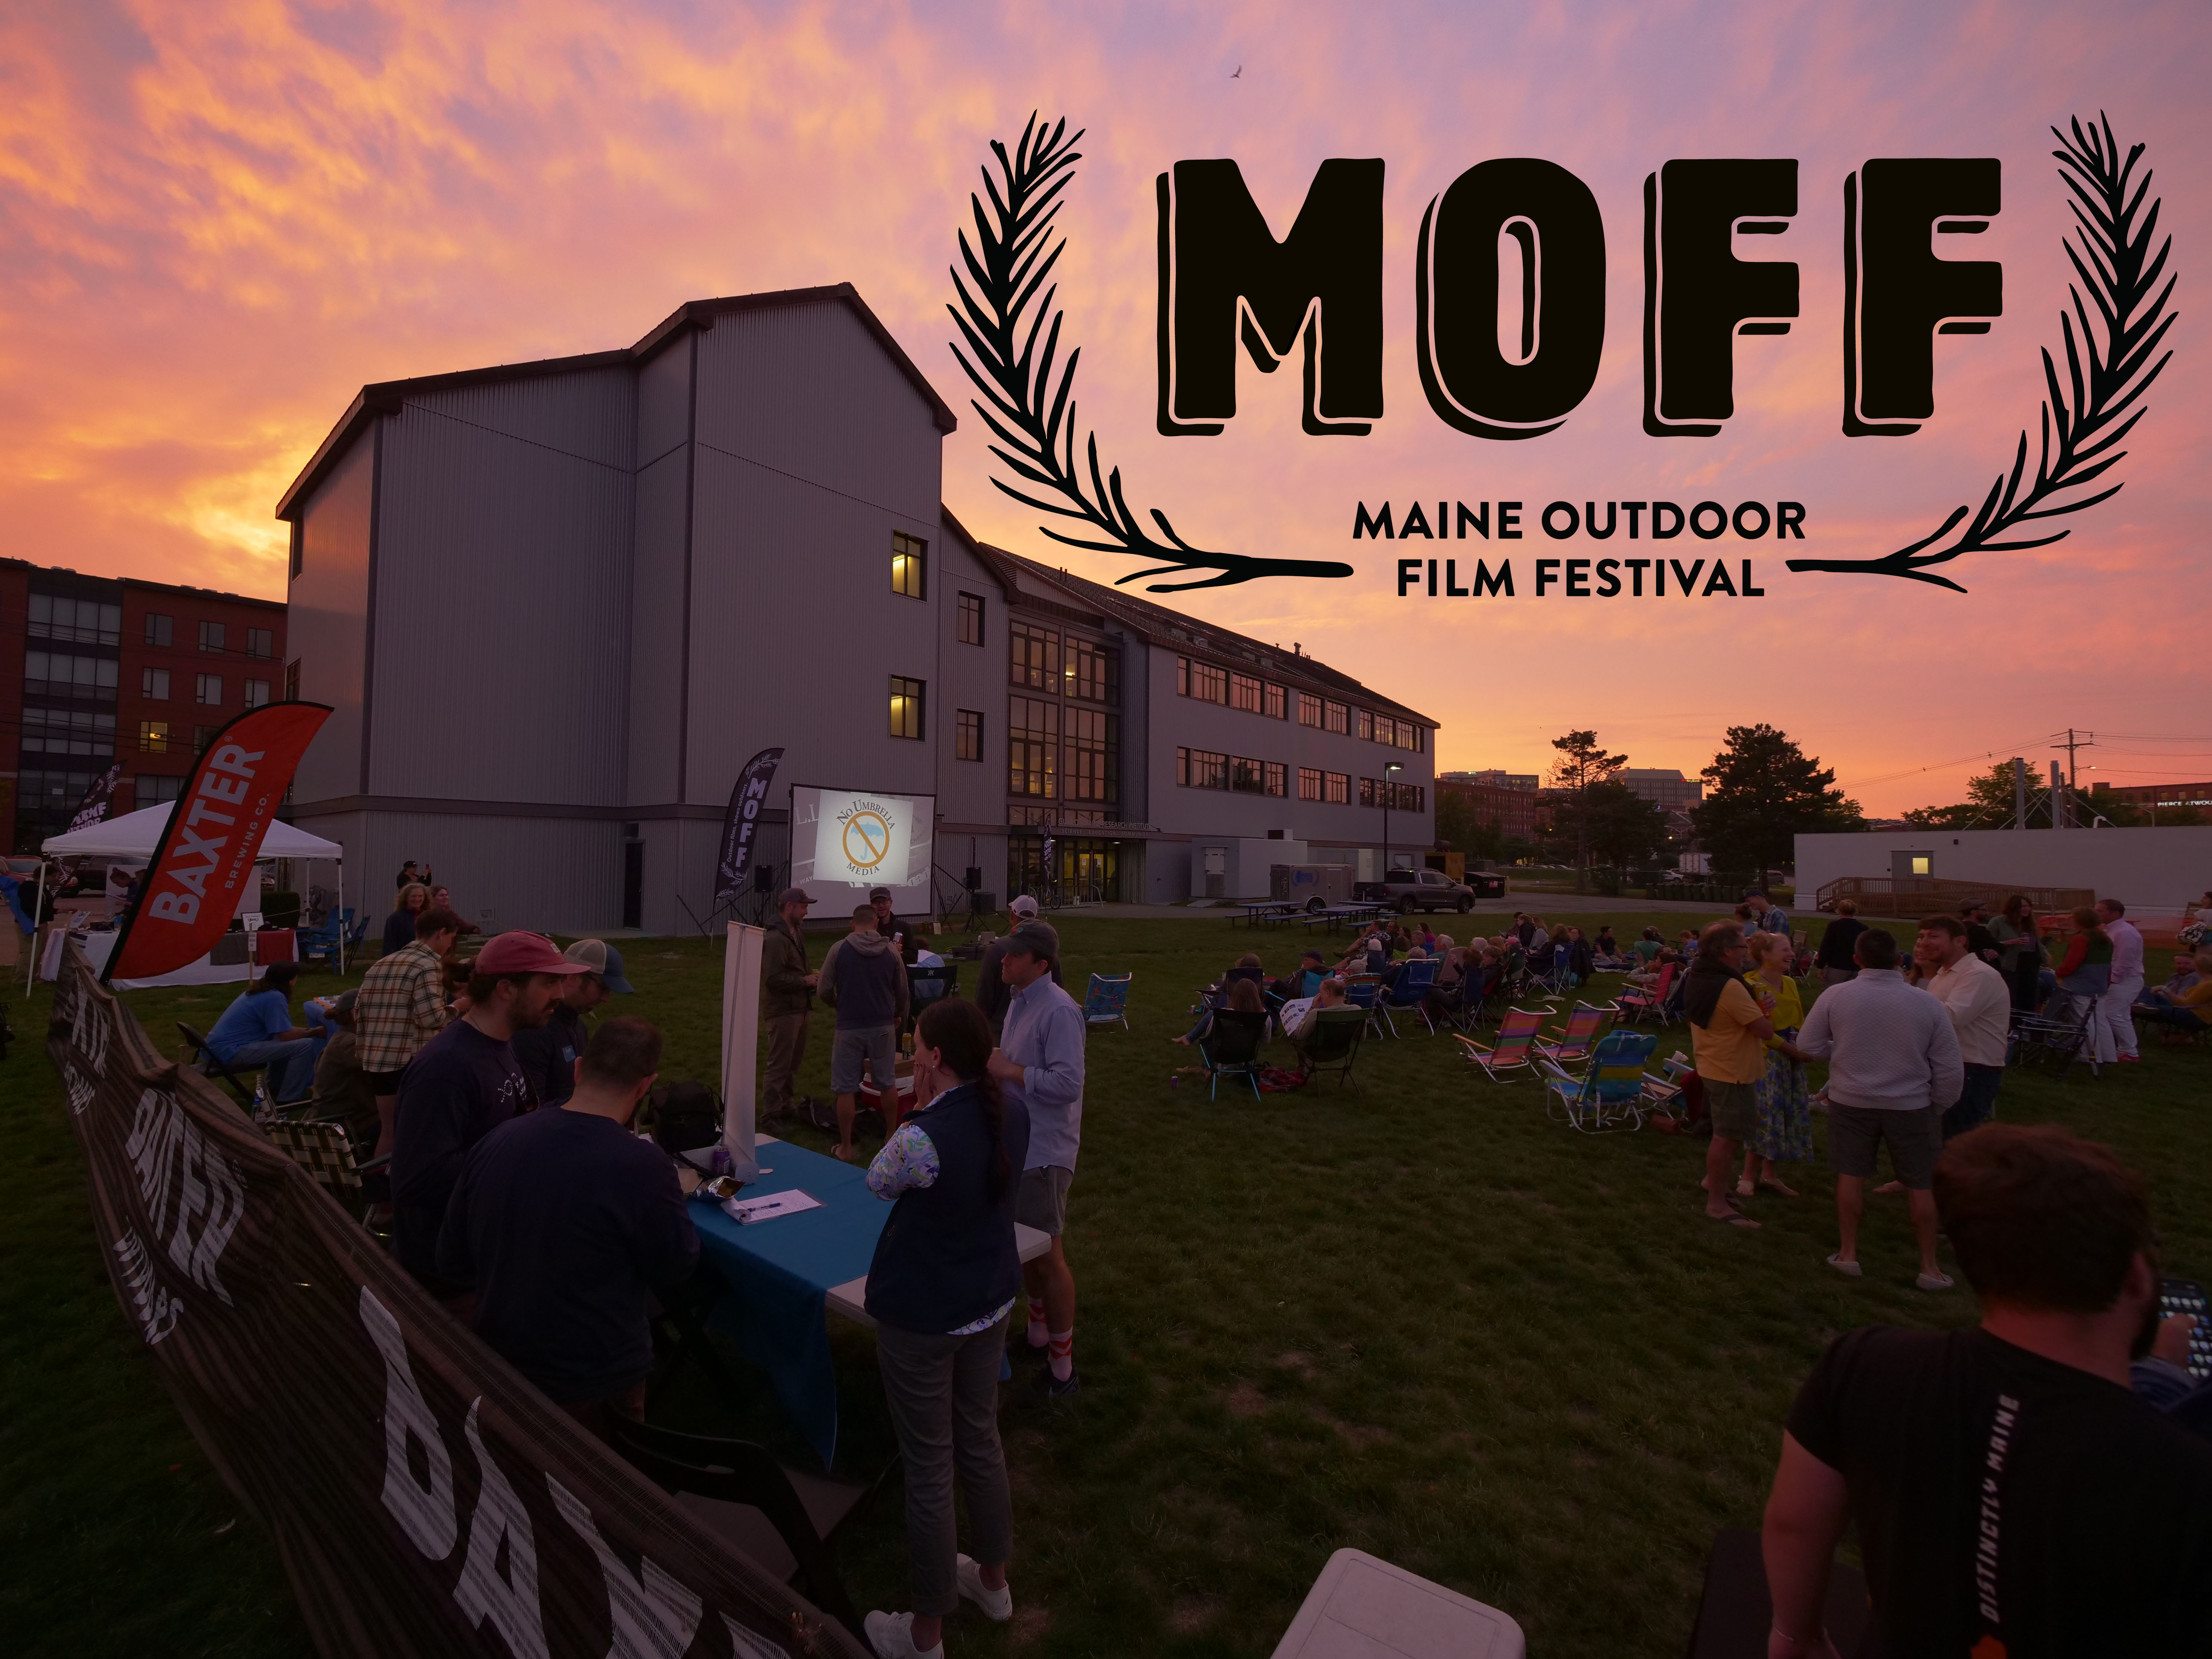 Eastern Mountain Sports to Sponsor Maine Outdoor Film Festival